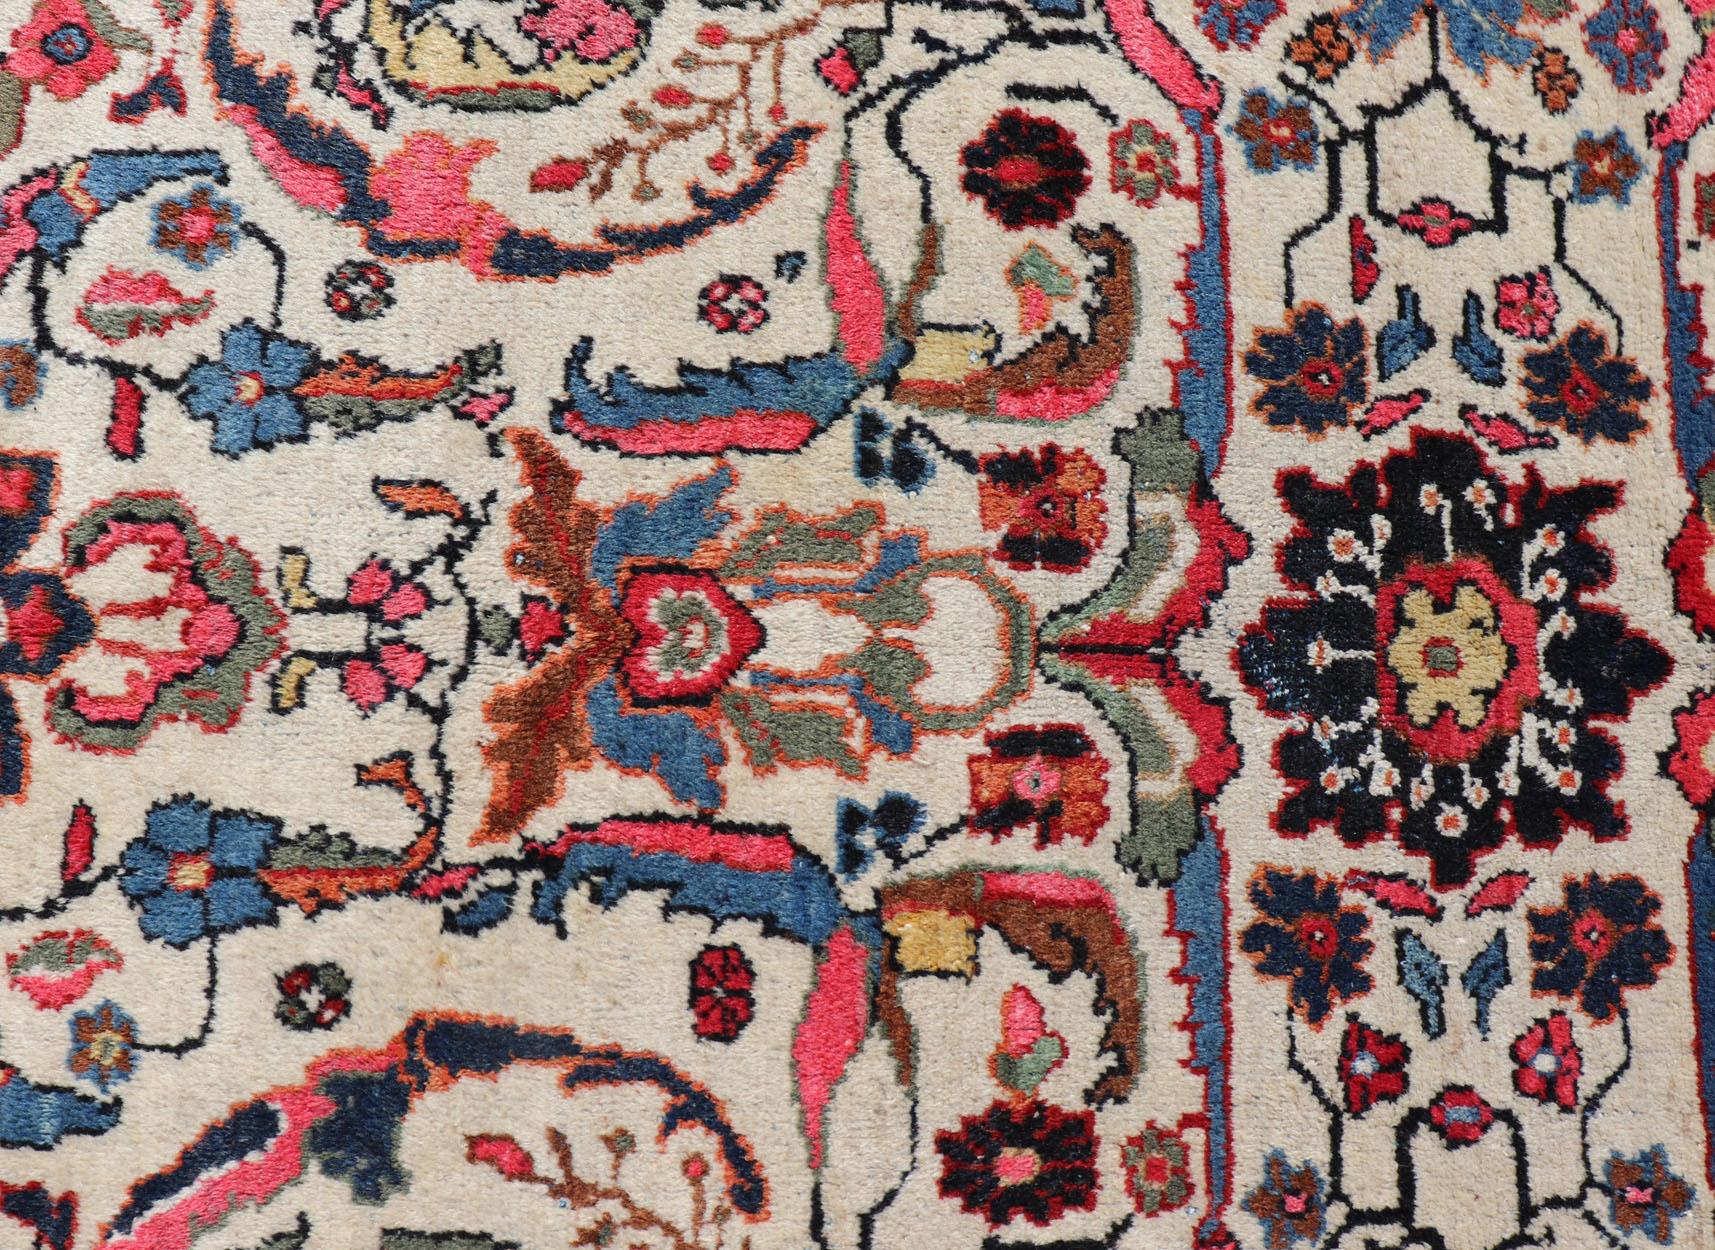 Persian semi antique Mahal rug with medallion design in ivory back ground with floral design.   rug PTA-200711, country of origin / type: Iran / Sultanabad, circa mid-20th century

Measures: 7'6 x 11'1 